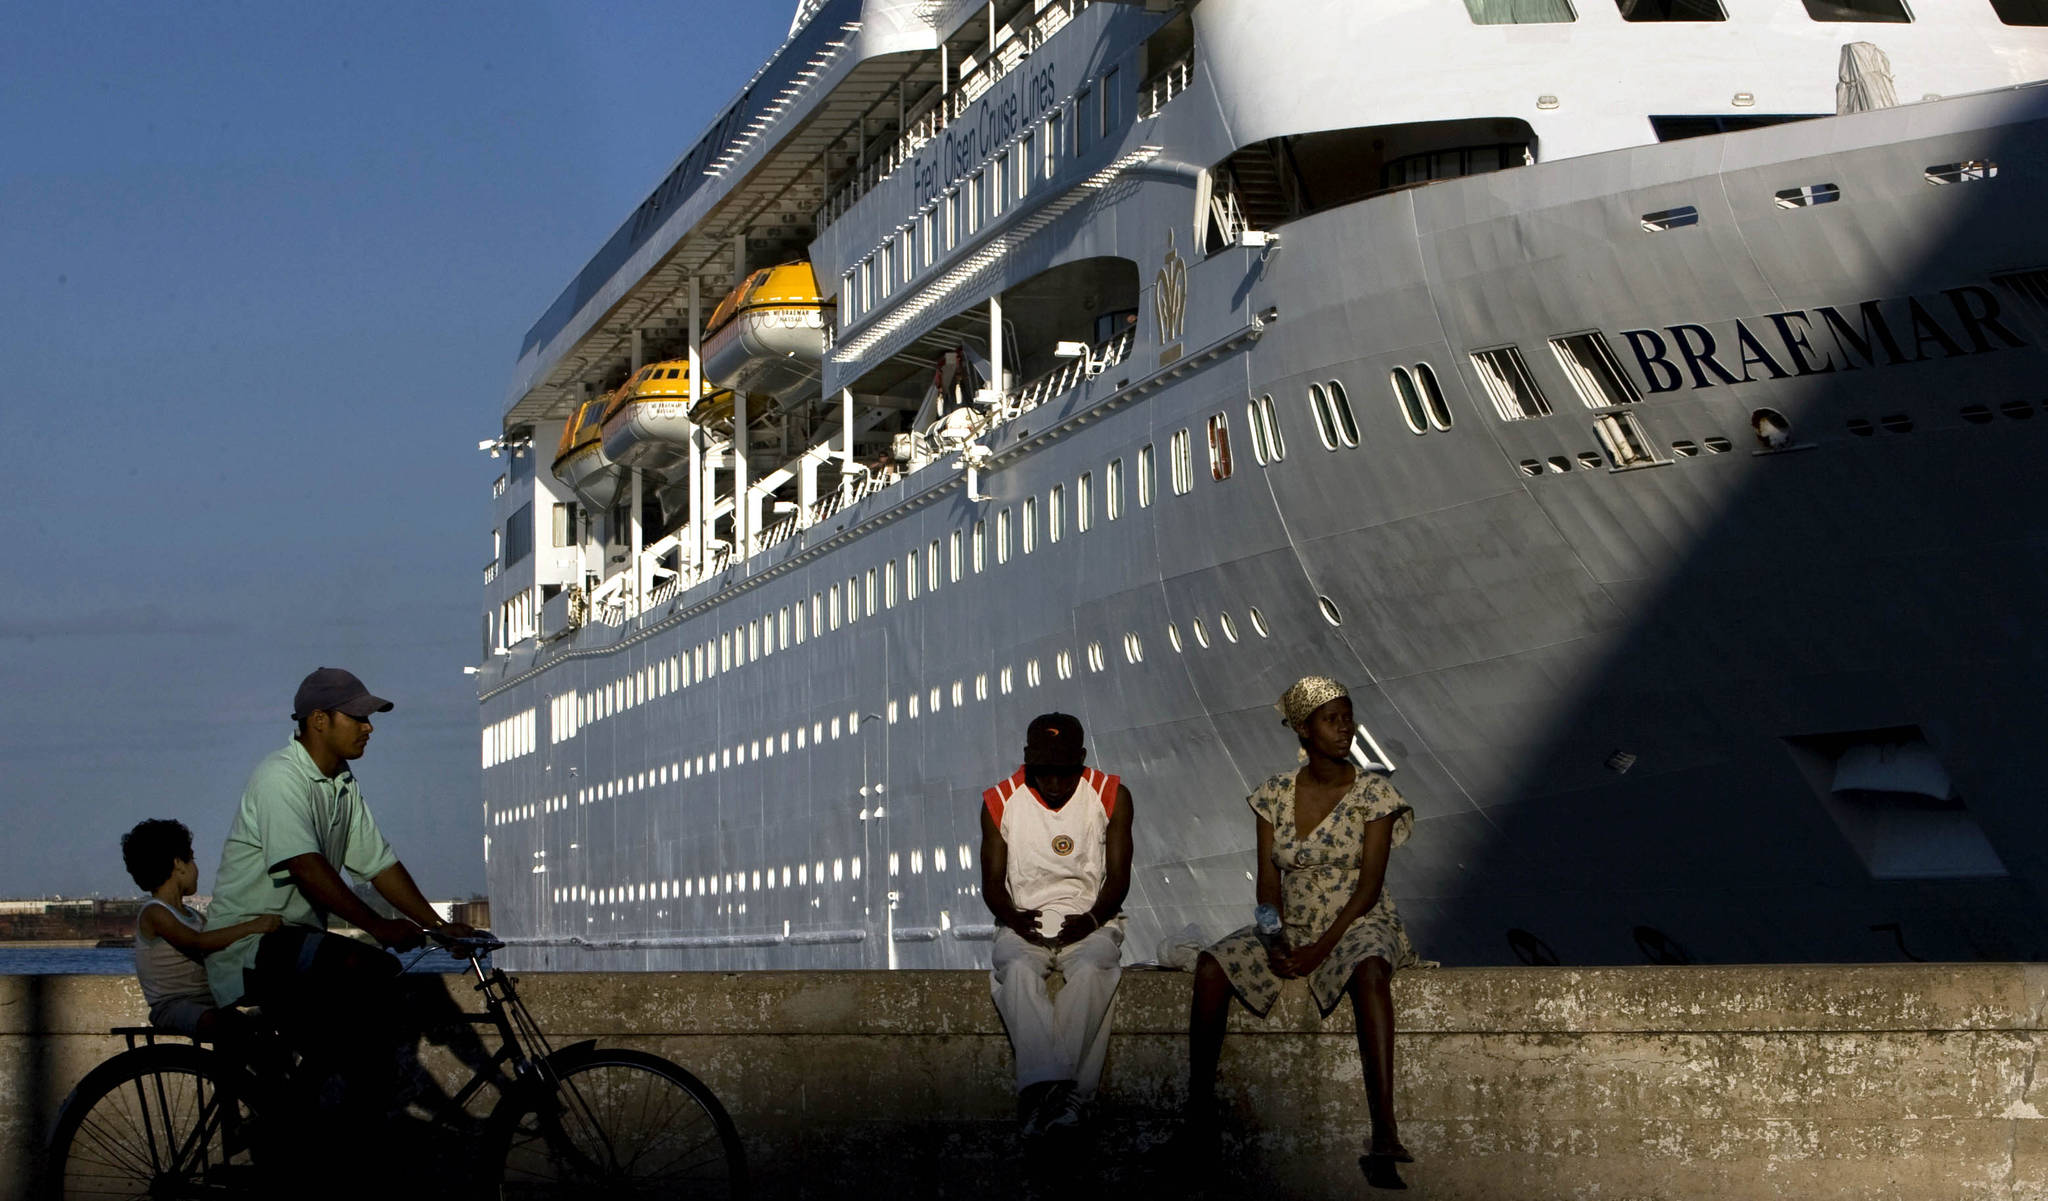 In this April 14, 2008 file photo, the Fred Olson Cruise Liner Braemar is docked at the port in Havana, Cuba. On Thursday, Feb. 27, 2020 the Dominican Republic turned back the Braemar because some on board showed potential symptoms of the new coronavirus COVID-19. (AP Photo | Ramon Espinosa, File)